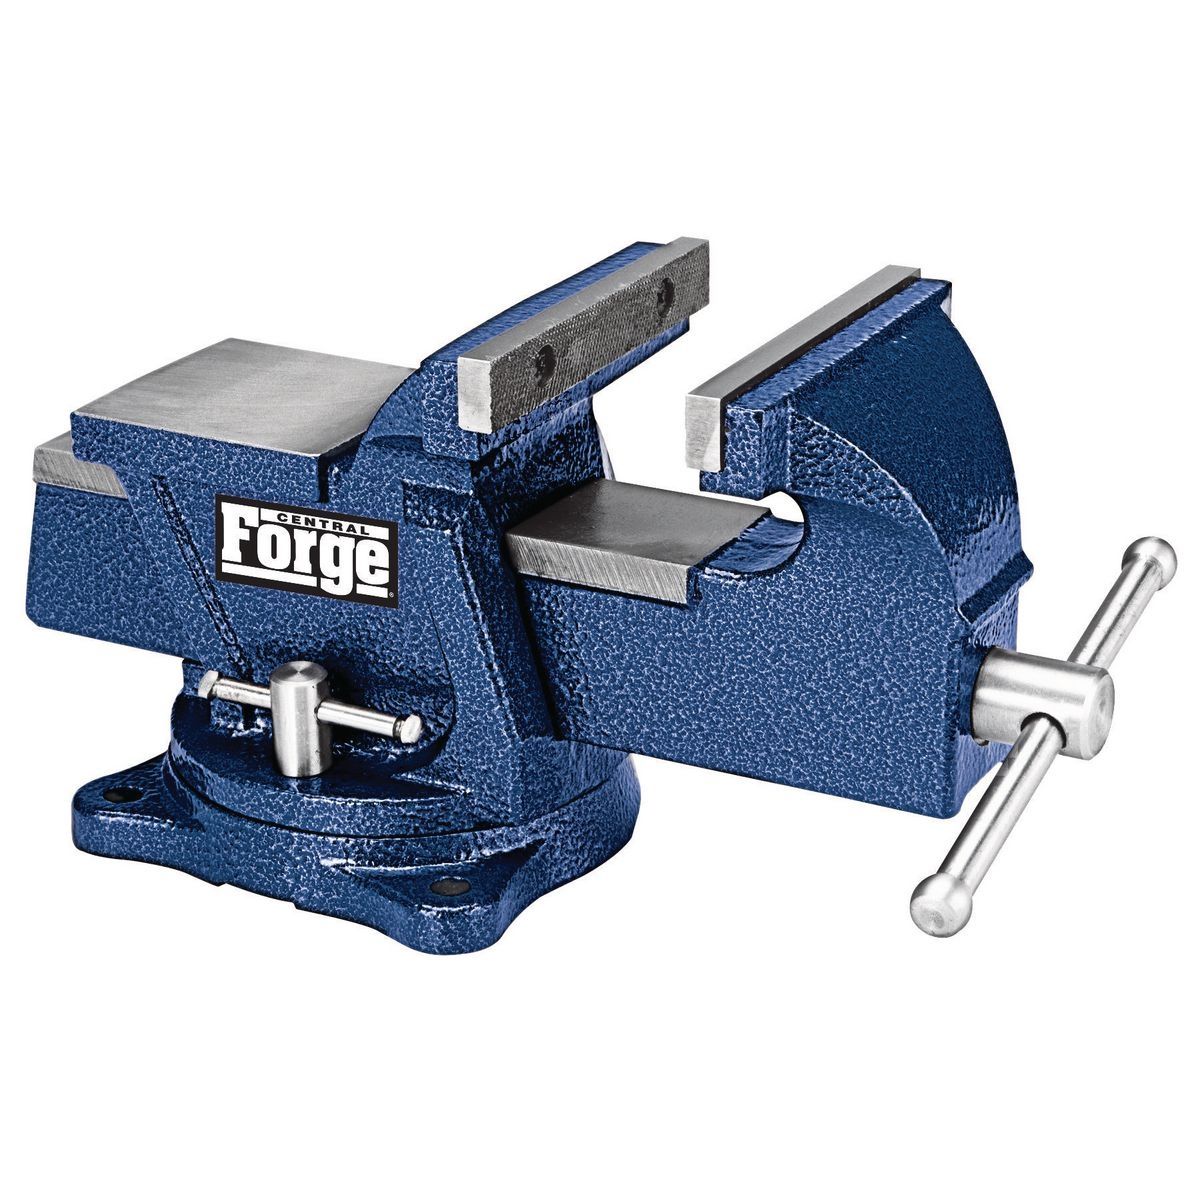 CENTRAL FORGE 5 in. Swivel Vise with Anvil